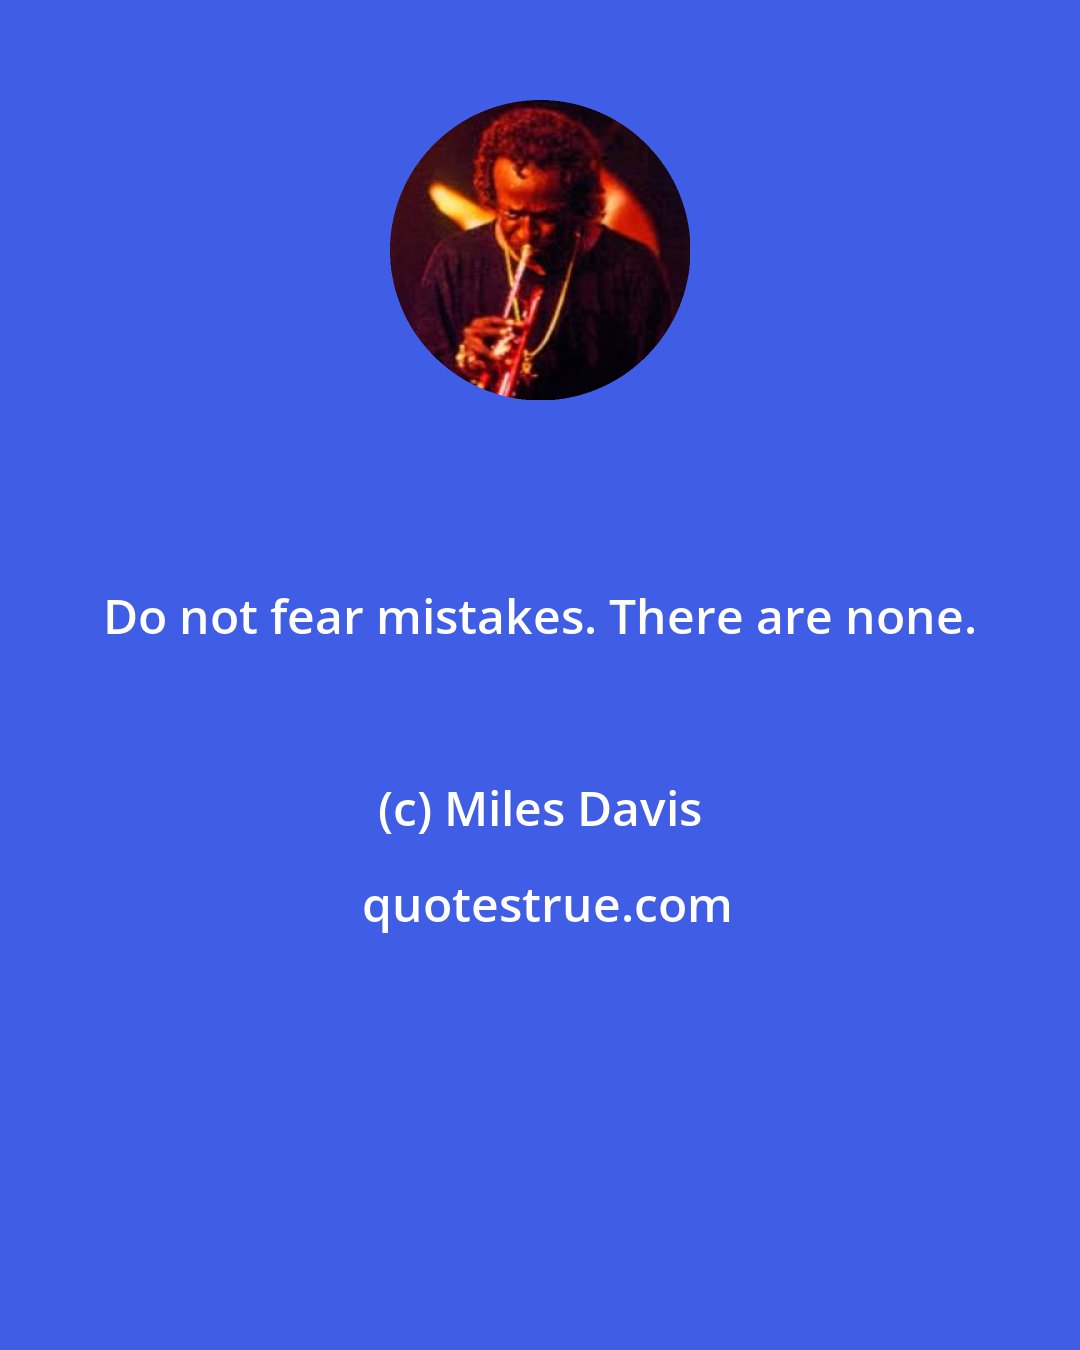 Miles Davis: Do not fear mistakes. There are none.